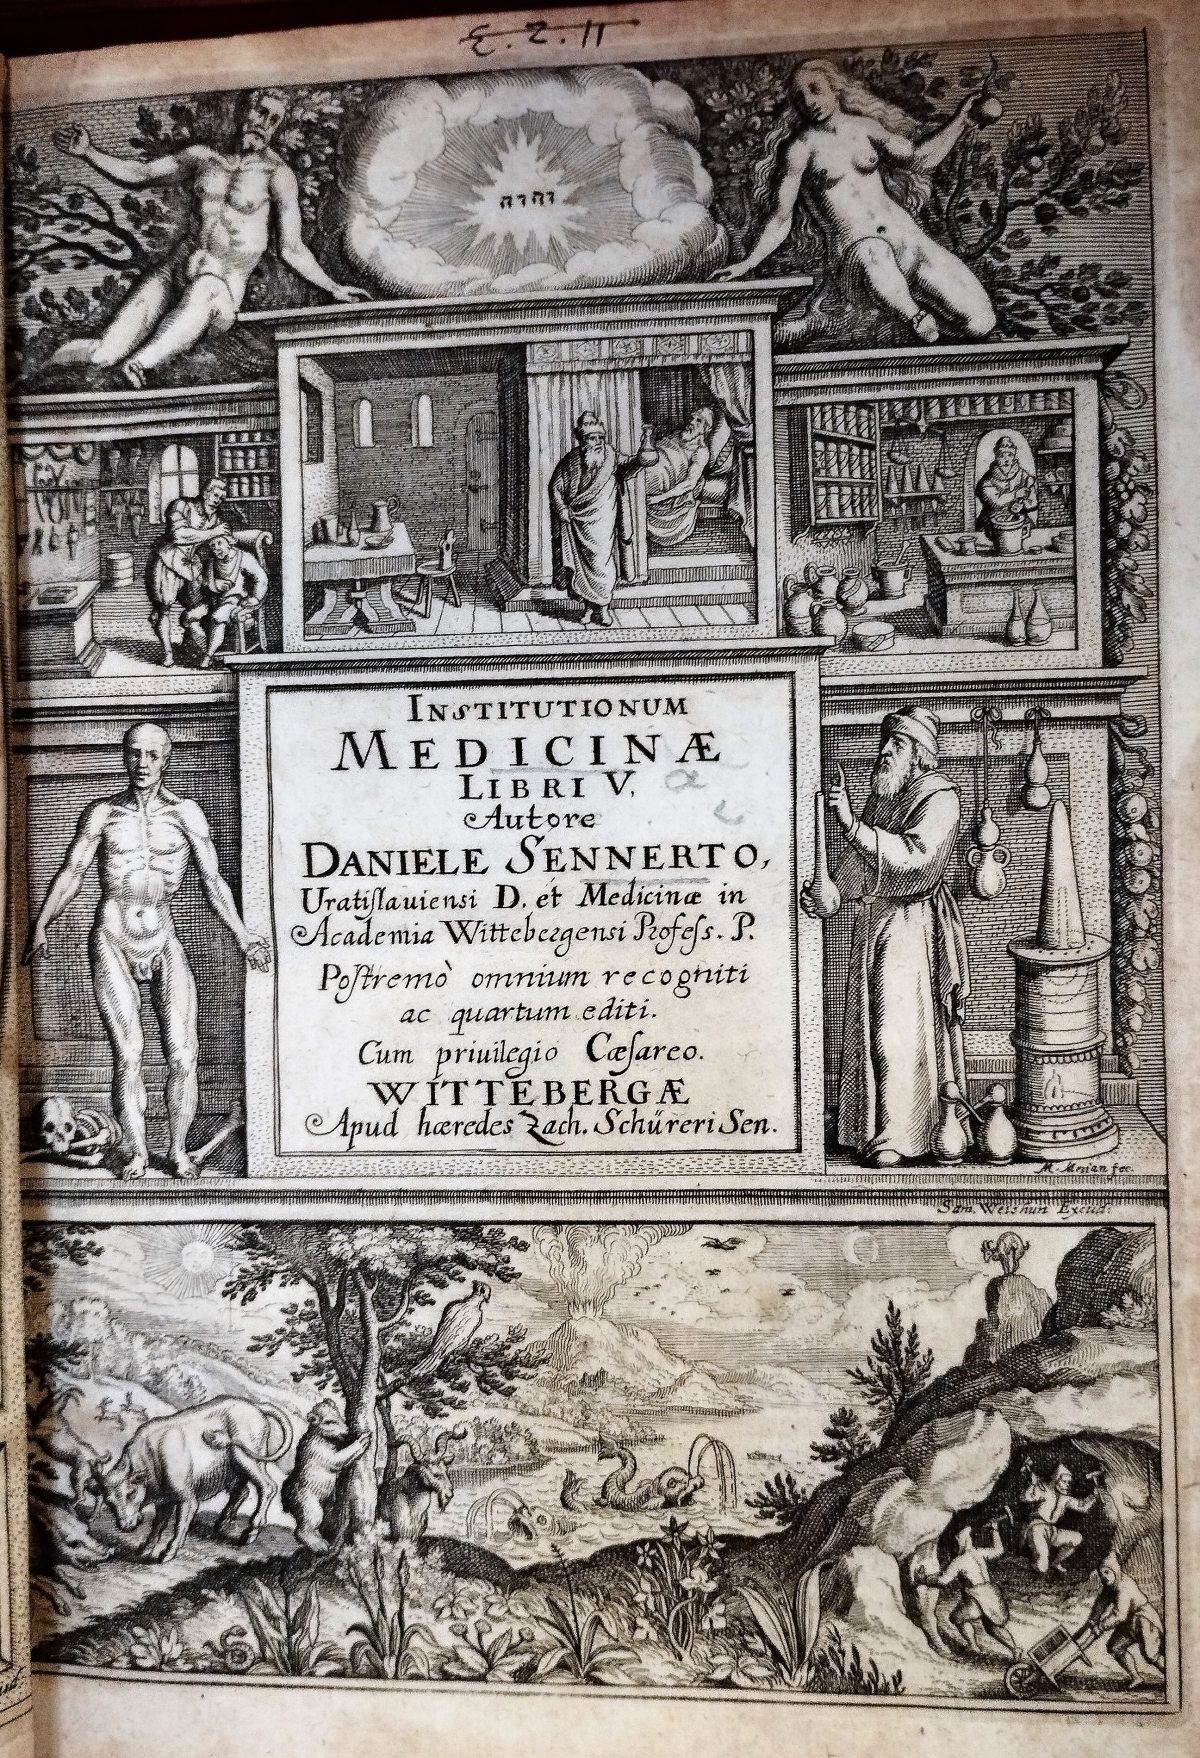 Added engraved title page with several scenes related to health and remedies. Doctors helping patients, a pharmacist preparing remedies, farmer working in the countryside.  